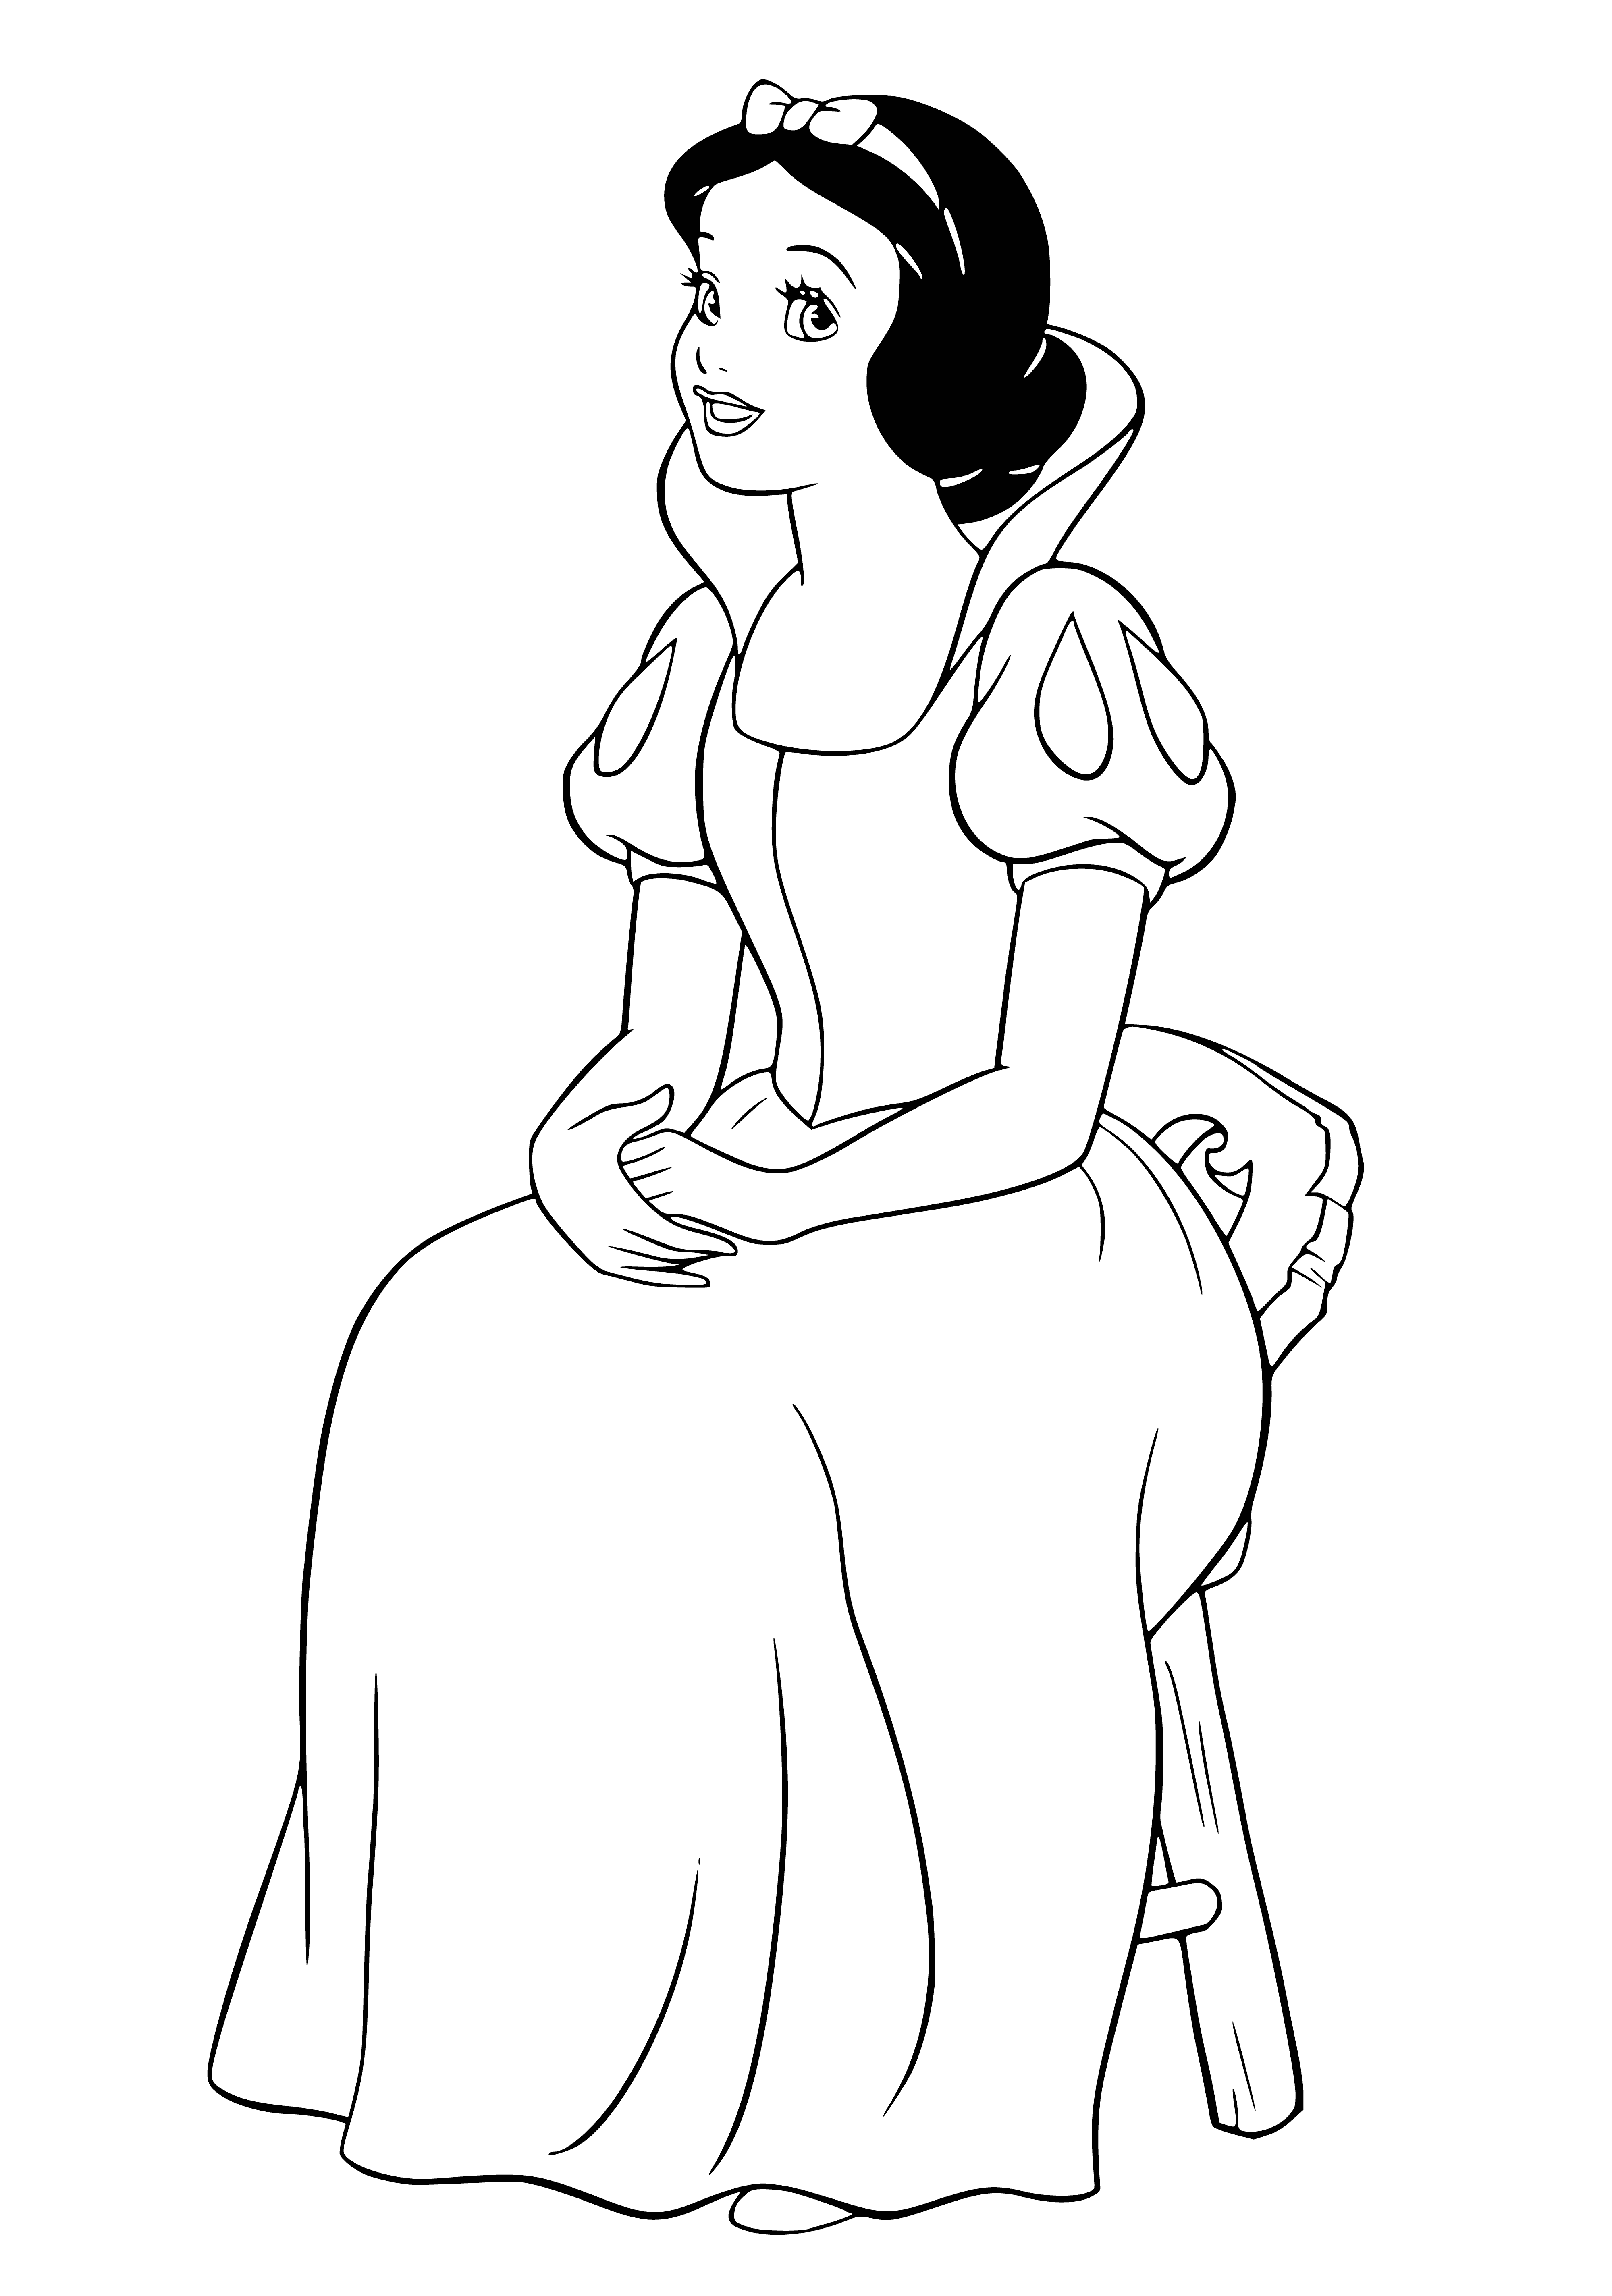 coloring page: Snow White stands before seven small men in a blue and white dress with a red bow, her black, curly hair adorned with a red apple.